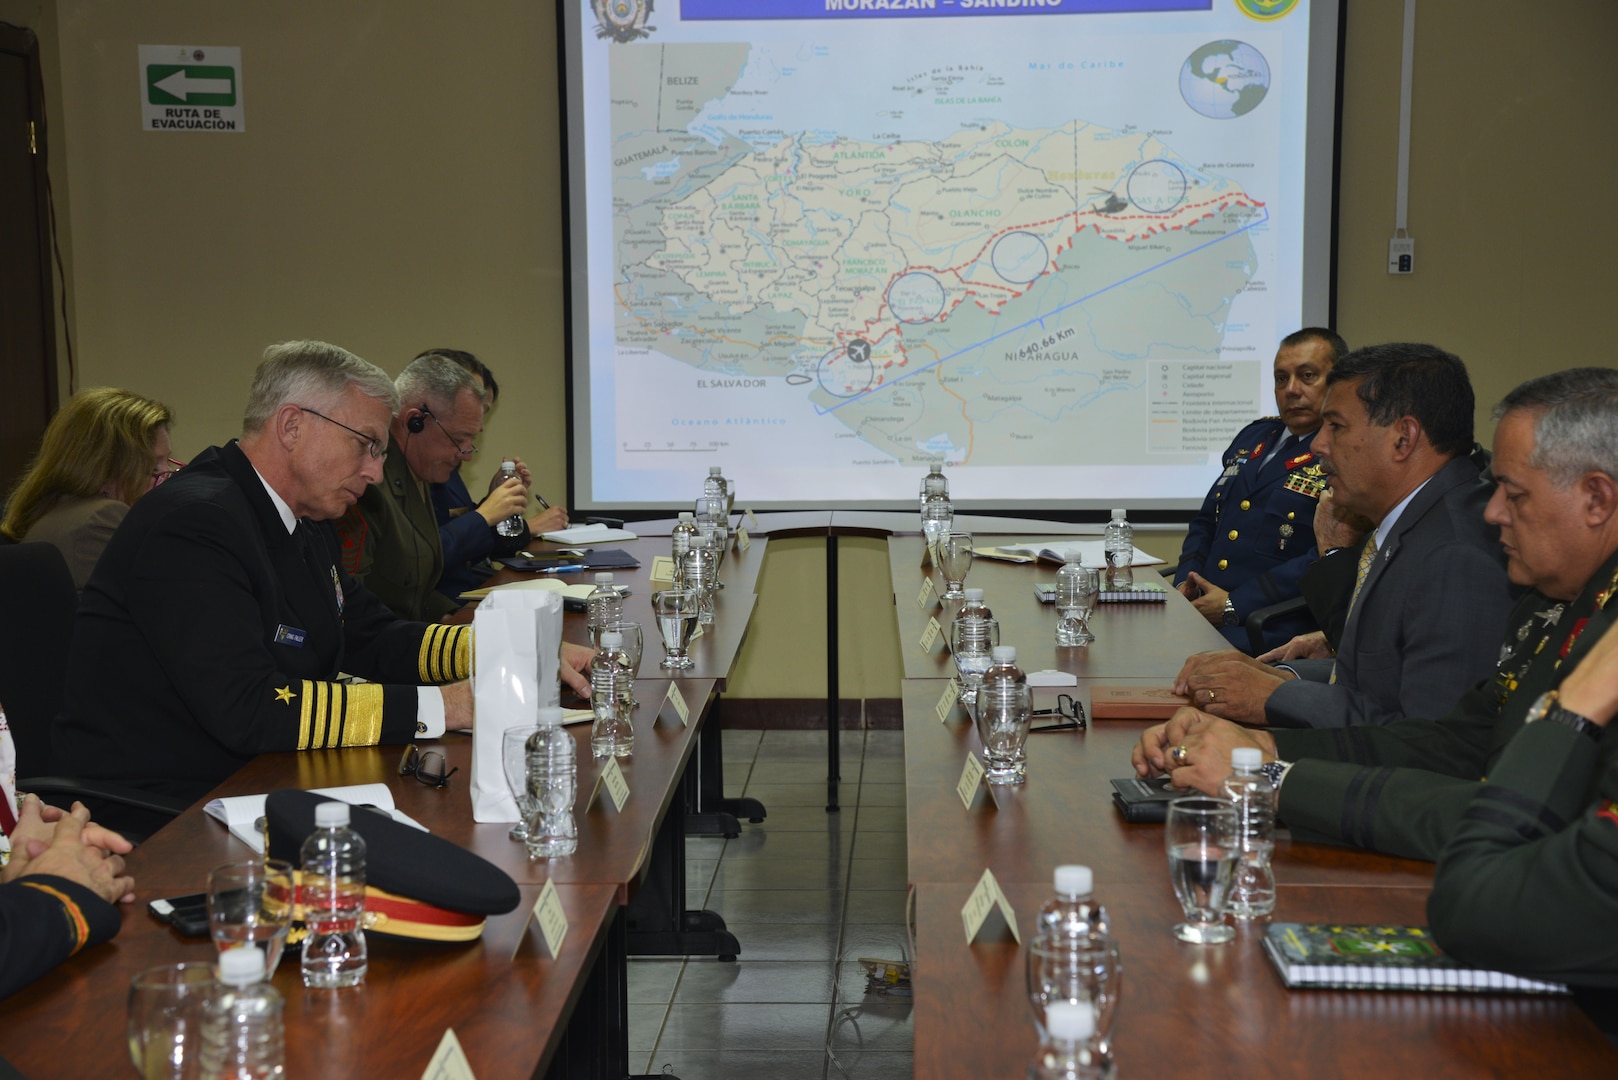 U.S. Navy Adm. Craig S. Faller, commander of U.S. Southern Command, meets with Honduran Minister of Defense Fredy Santiago Díaz Zelaya and Chief of the Honduran Armed Forces, Maj. Gen. René Orlando Ponce Fonseca Jan. 22. The leaders discussed shared efforts to bolster security in the region.